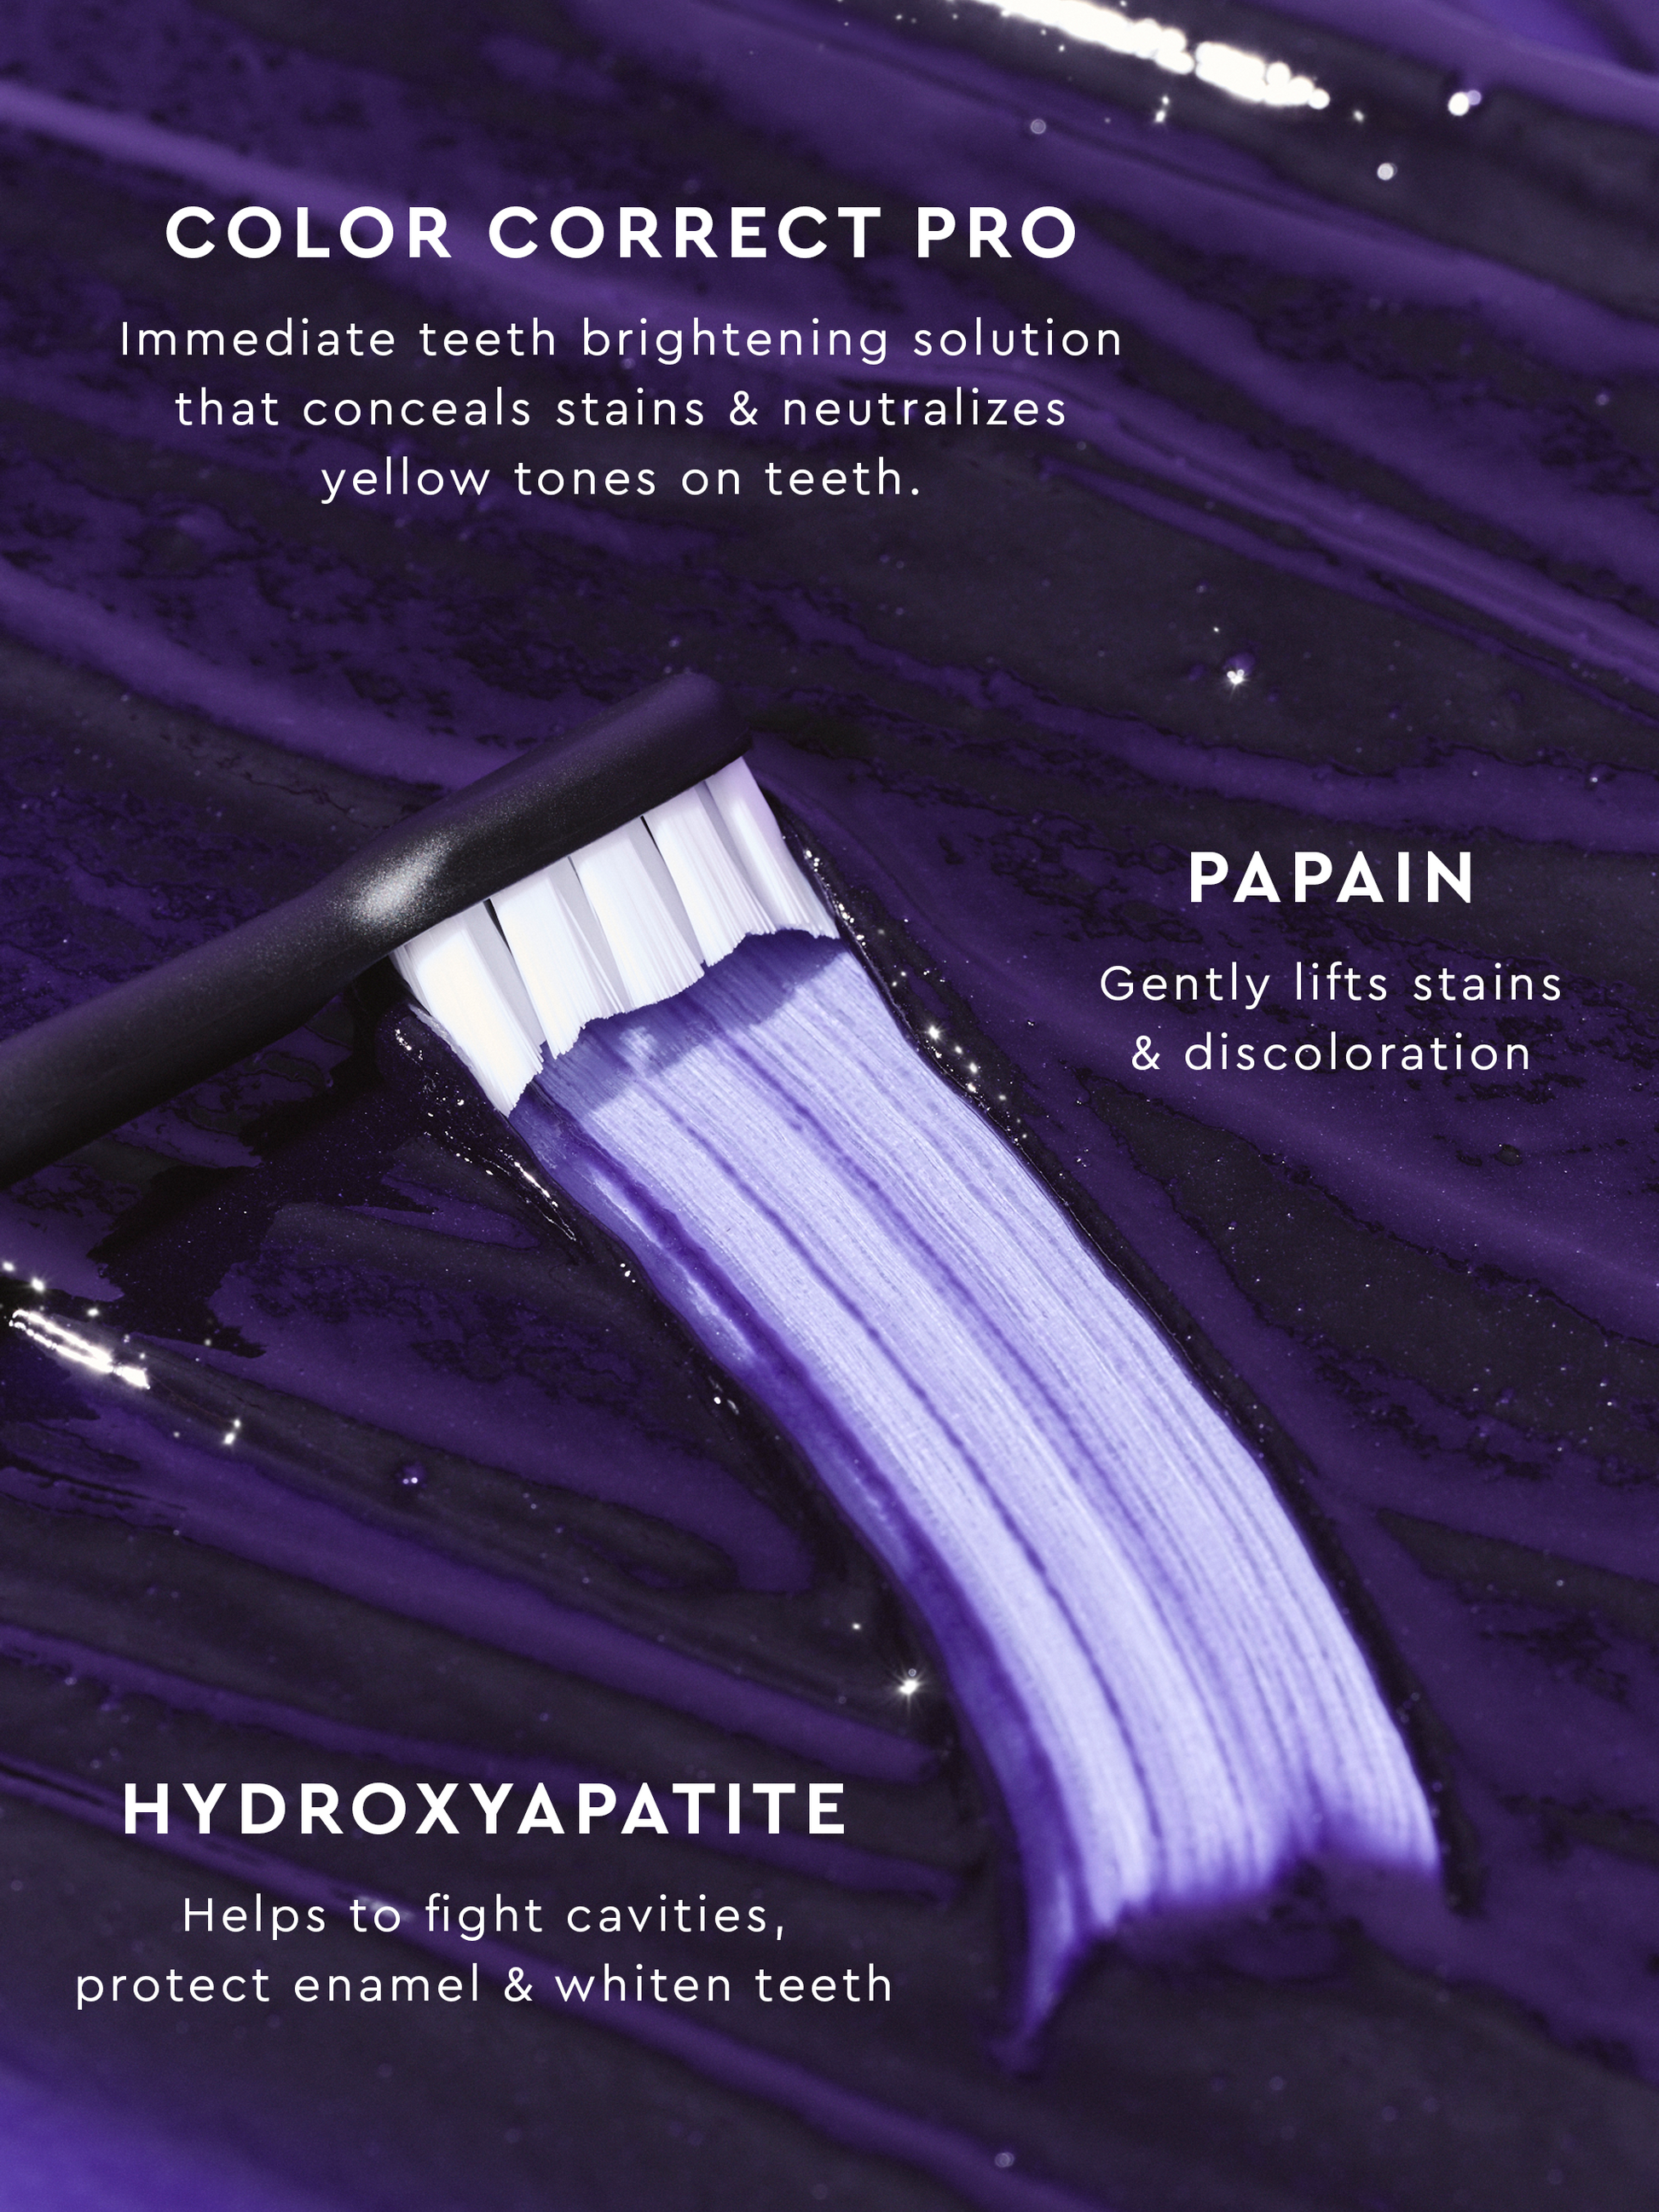 does purple toothpaste work